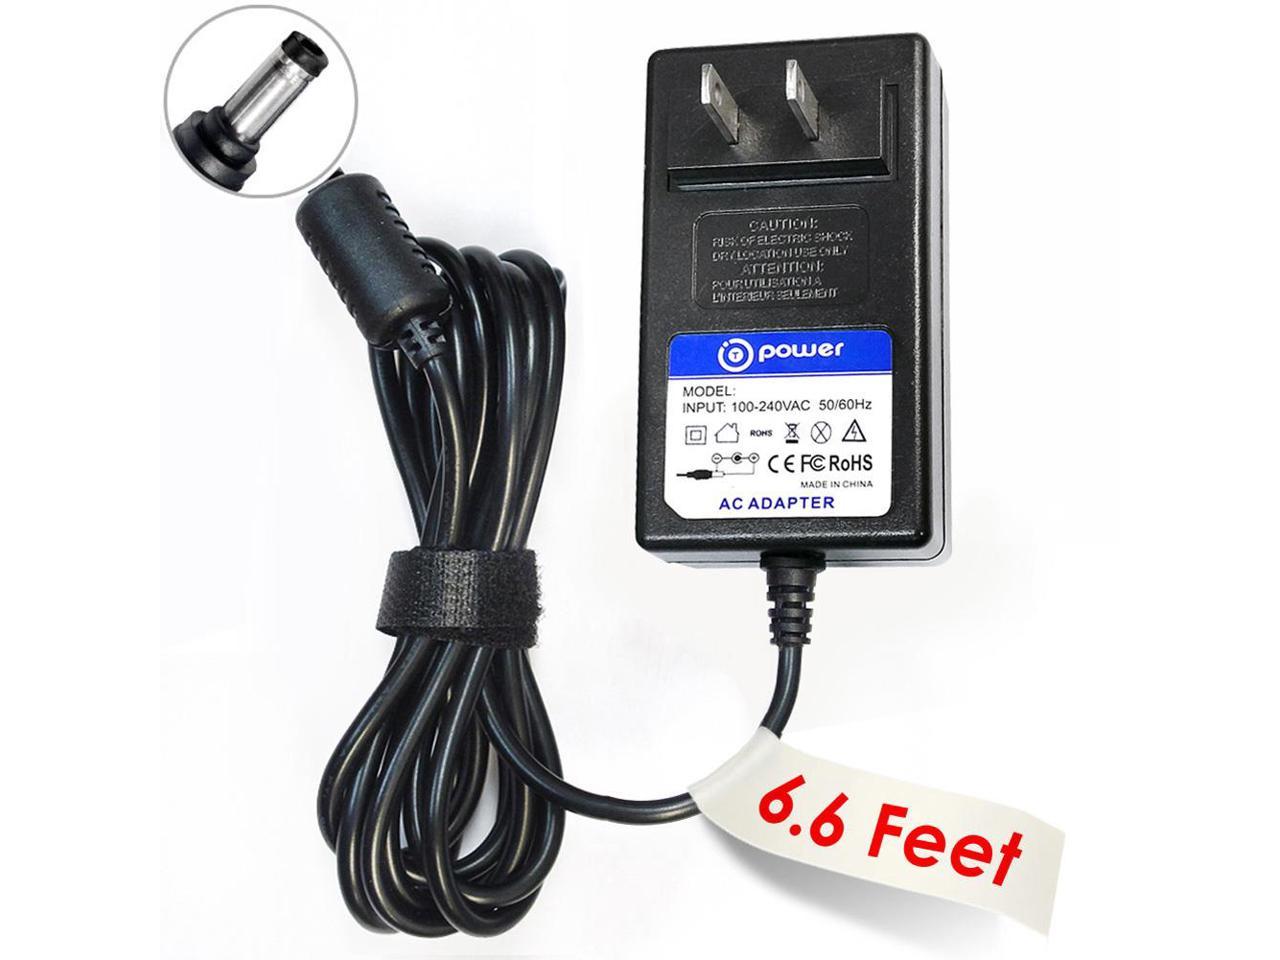 Ac Dc adapter Compatible with Avaya IP 400 IP400 IP 500 IP500 P,N 700357387 PSG60-24-04ES Phone IP403 IP 403 Office DS MU-LAW Module T-Power 6.6 ft long cord 